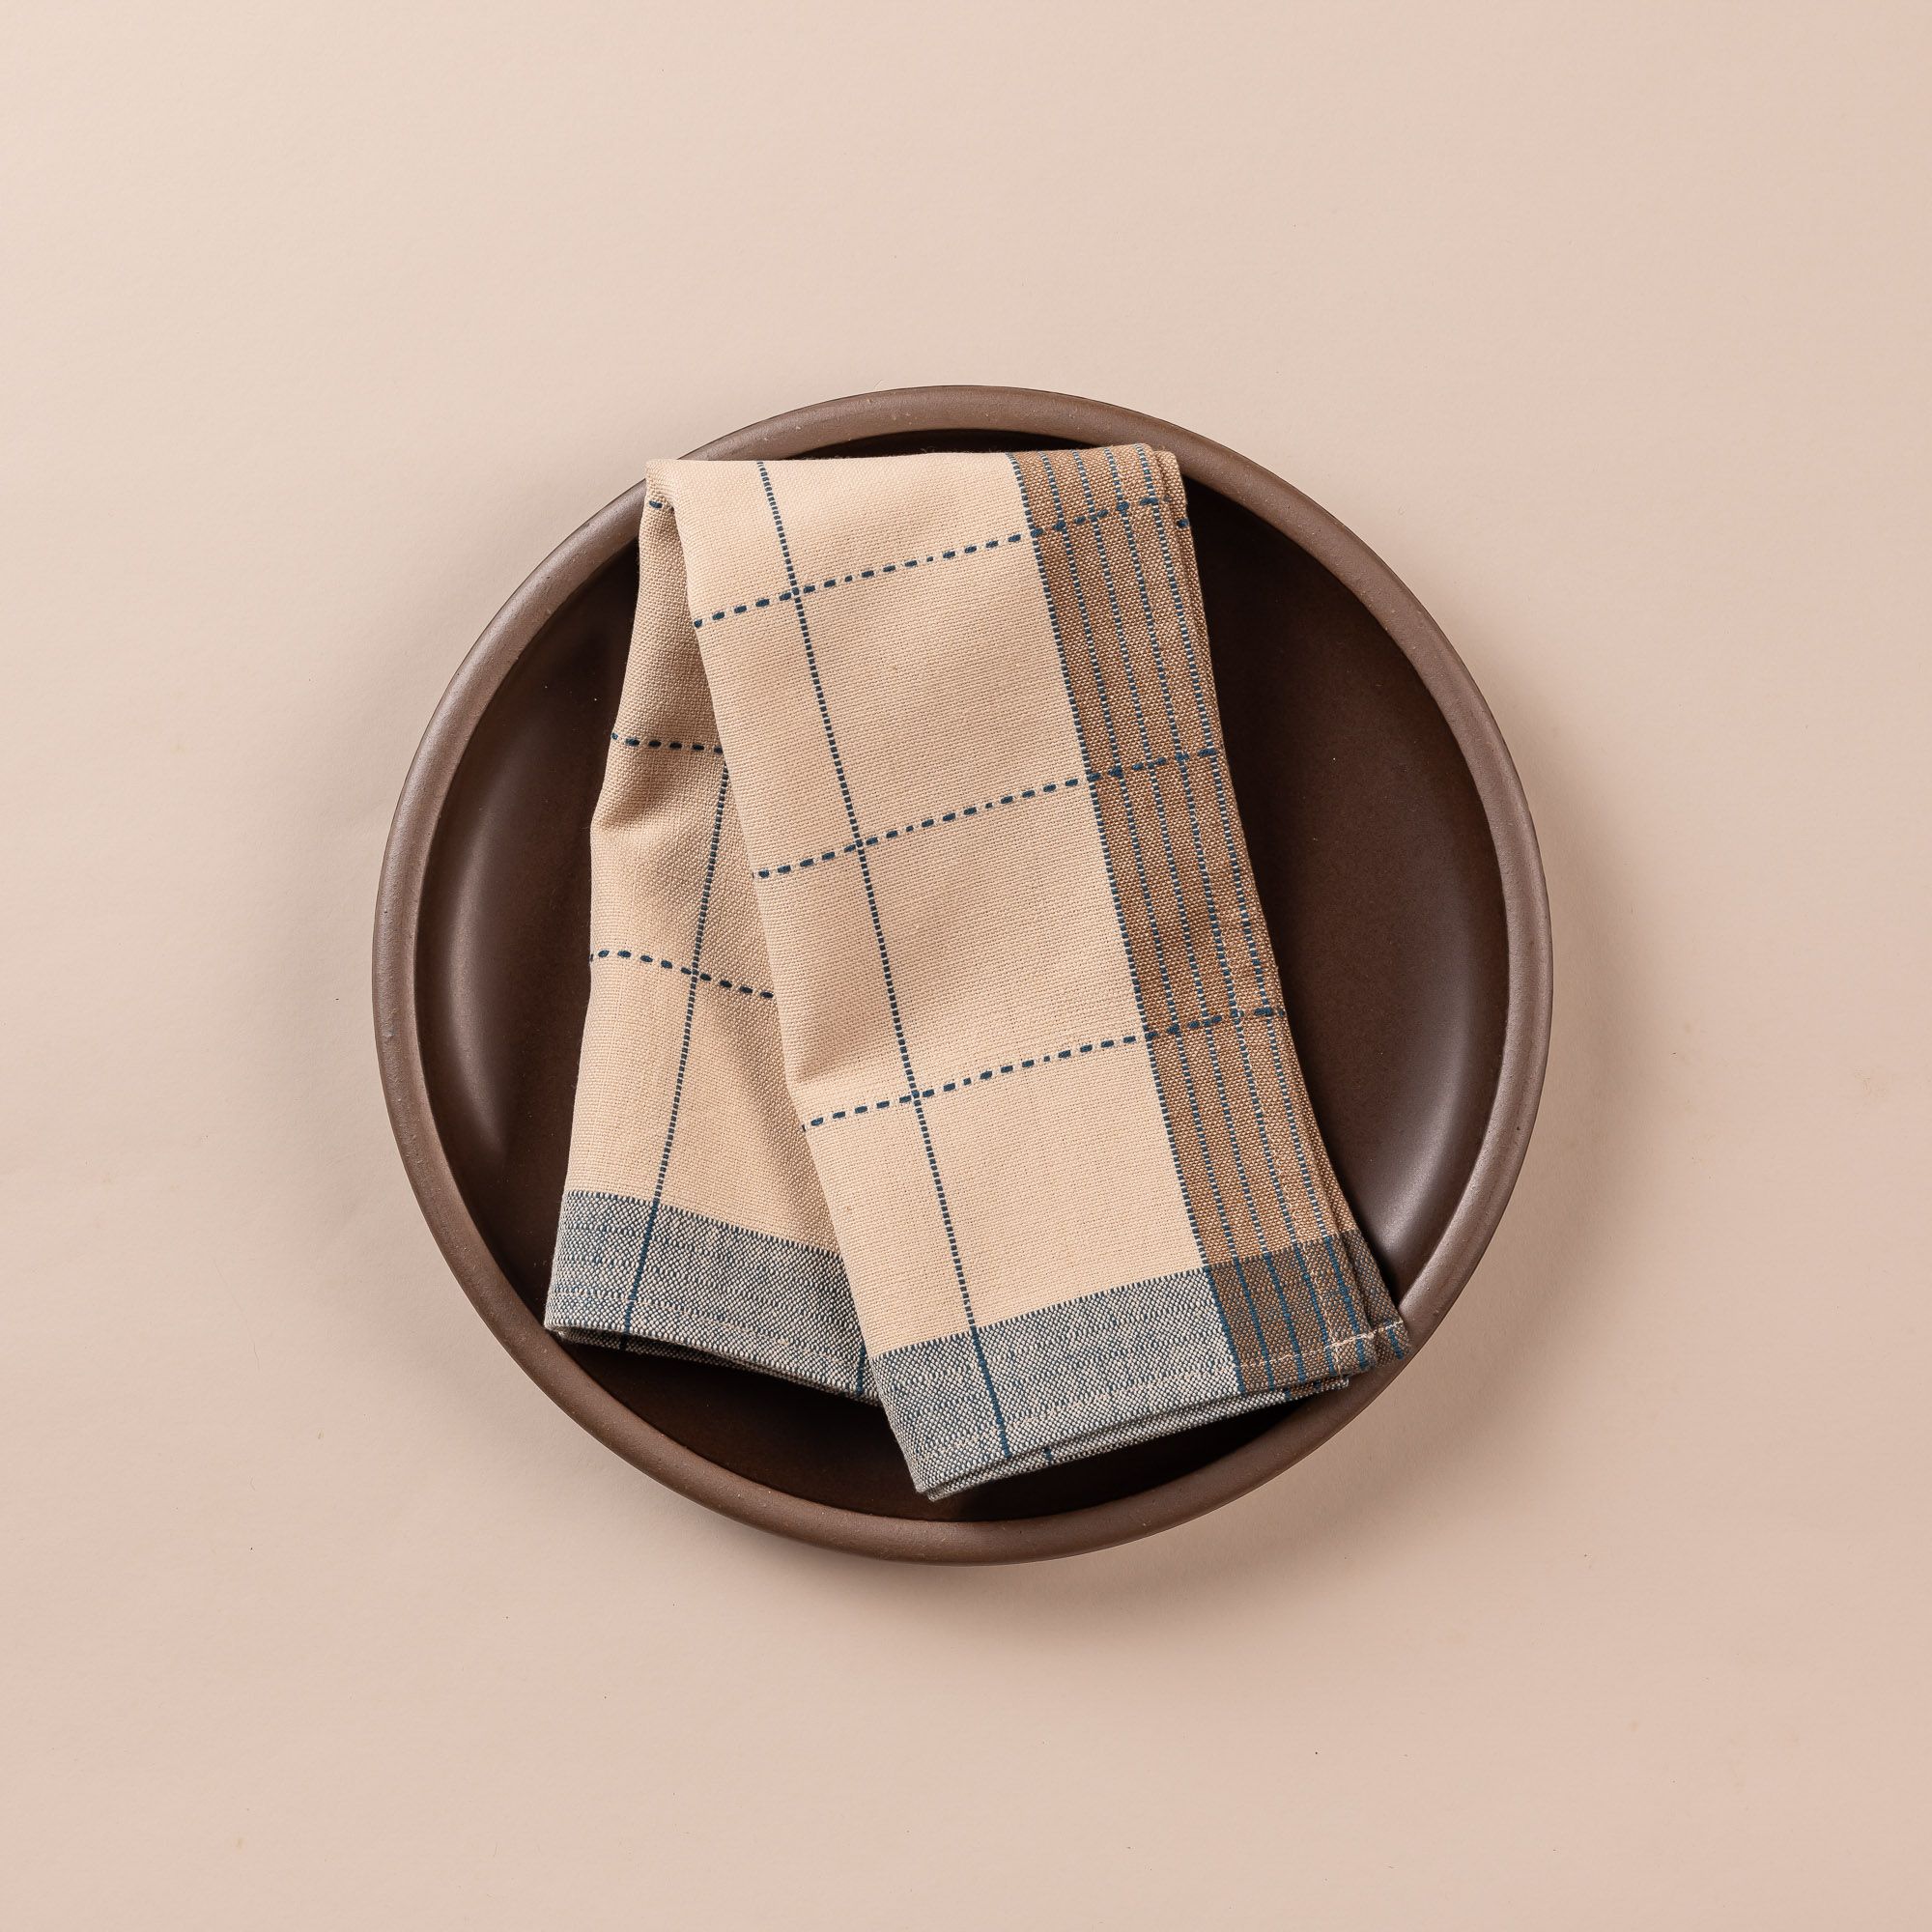 A natural folded napkin sits on a deep brown dinner plate. The napkin is designed with turquoise gridlines with light blue and tan striped edging.